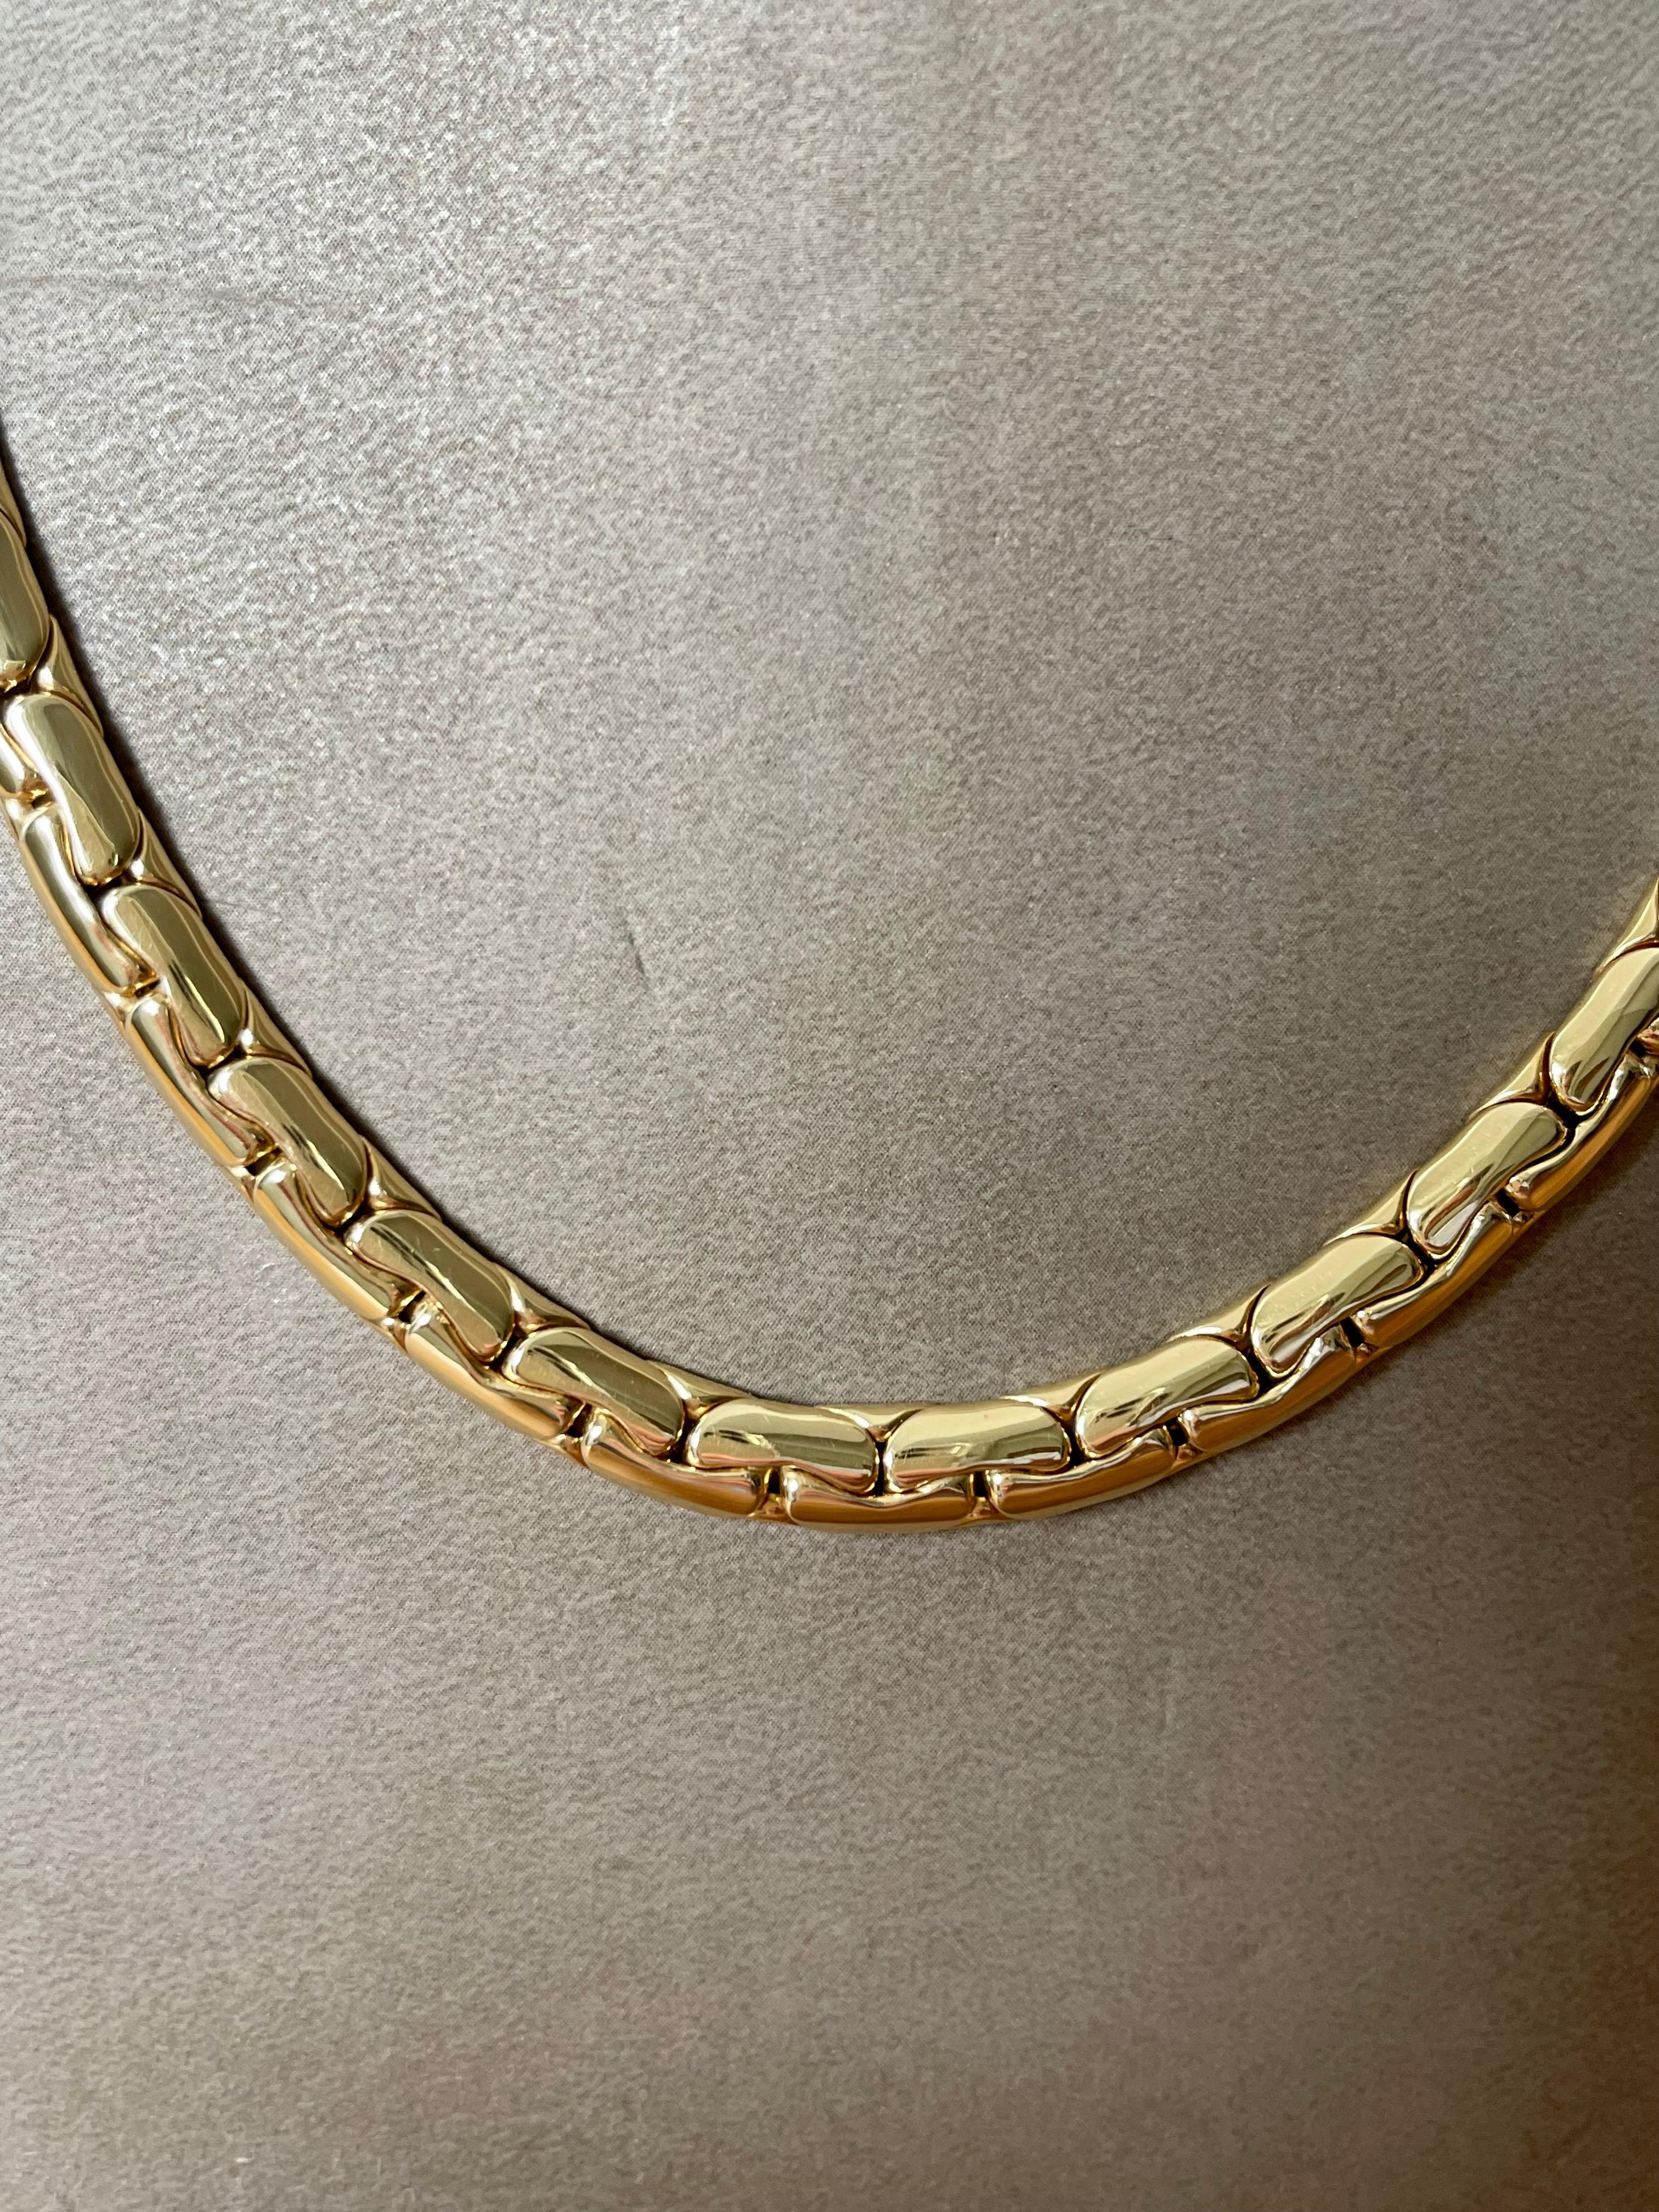 Handmade 18 K Yellow Gold Necklace by Gübelin Lucerne For Sale 2